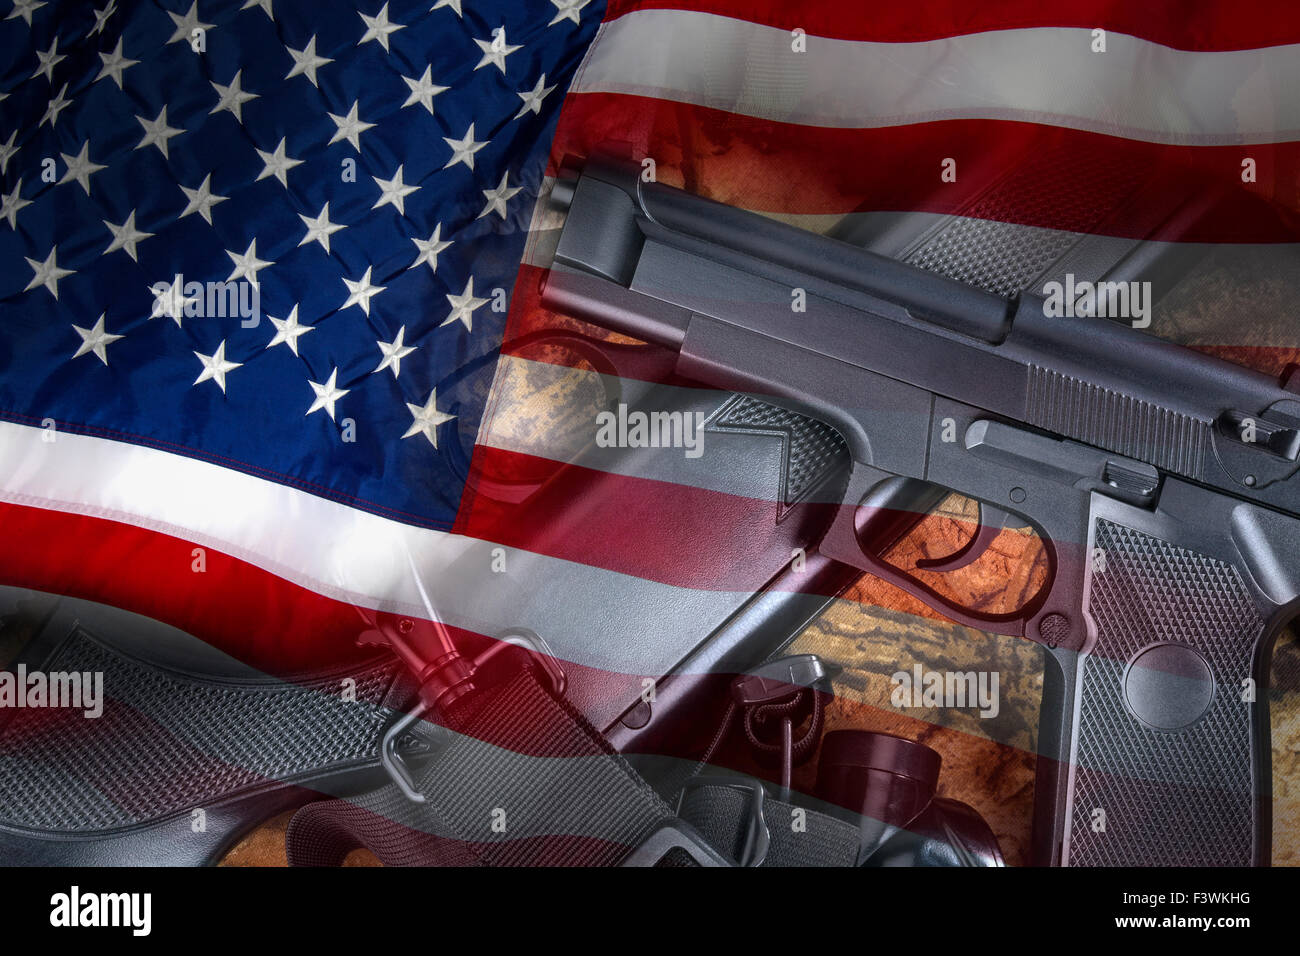 United States Gun Laws - Guns and weapons Stock Photo